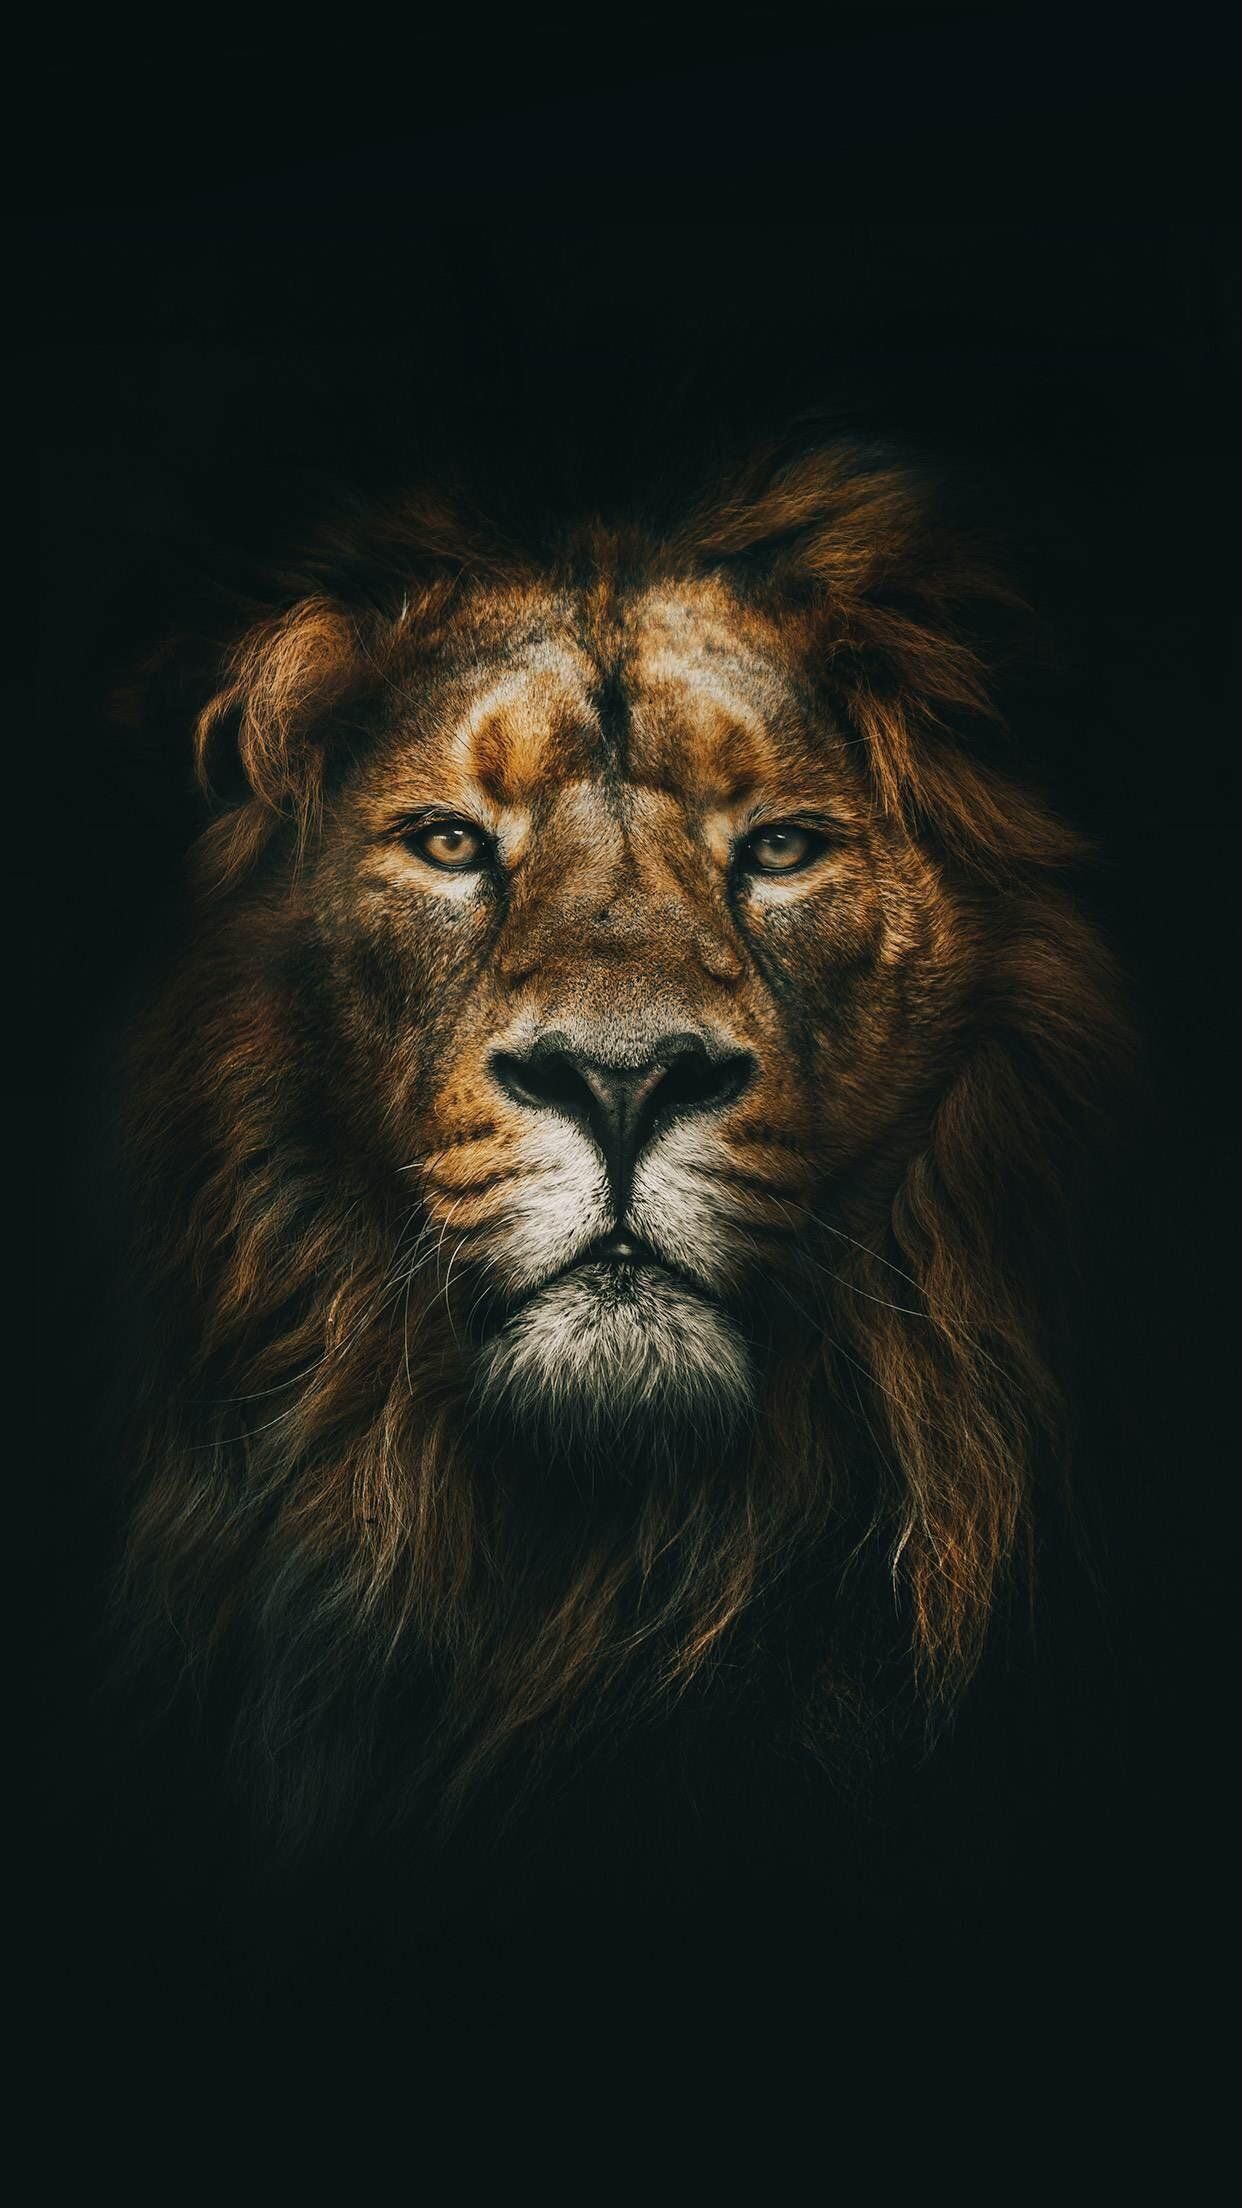 Lion Aesthetic Pictures Wallpapers - Wallpaper Cave